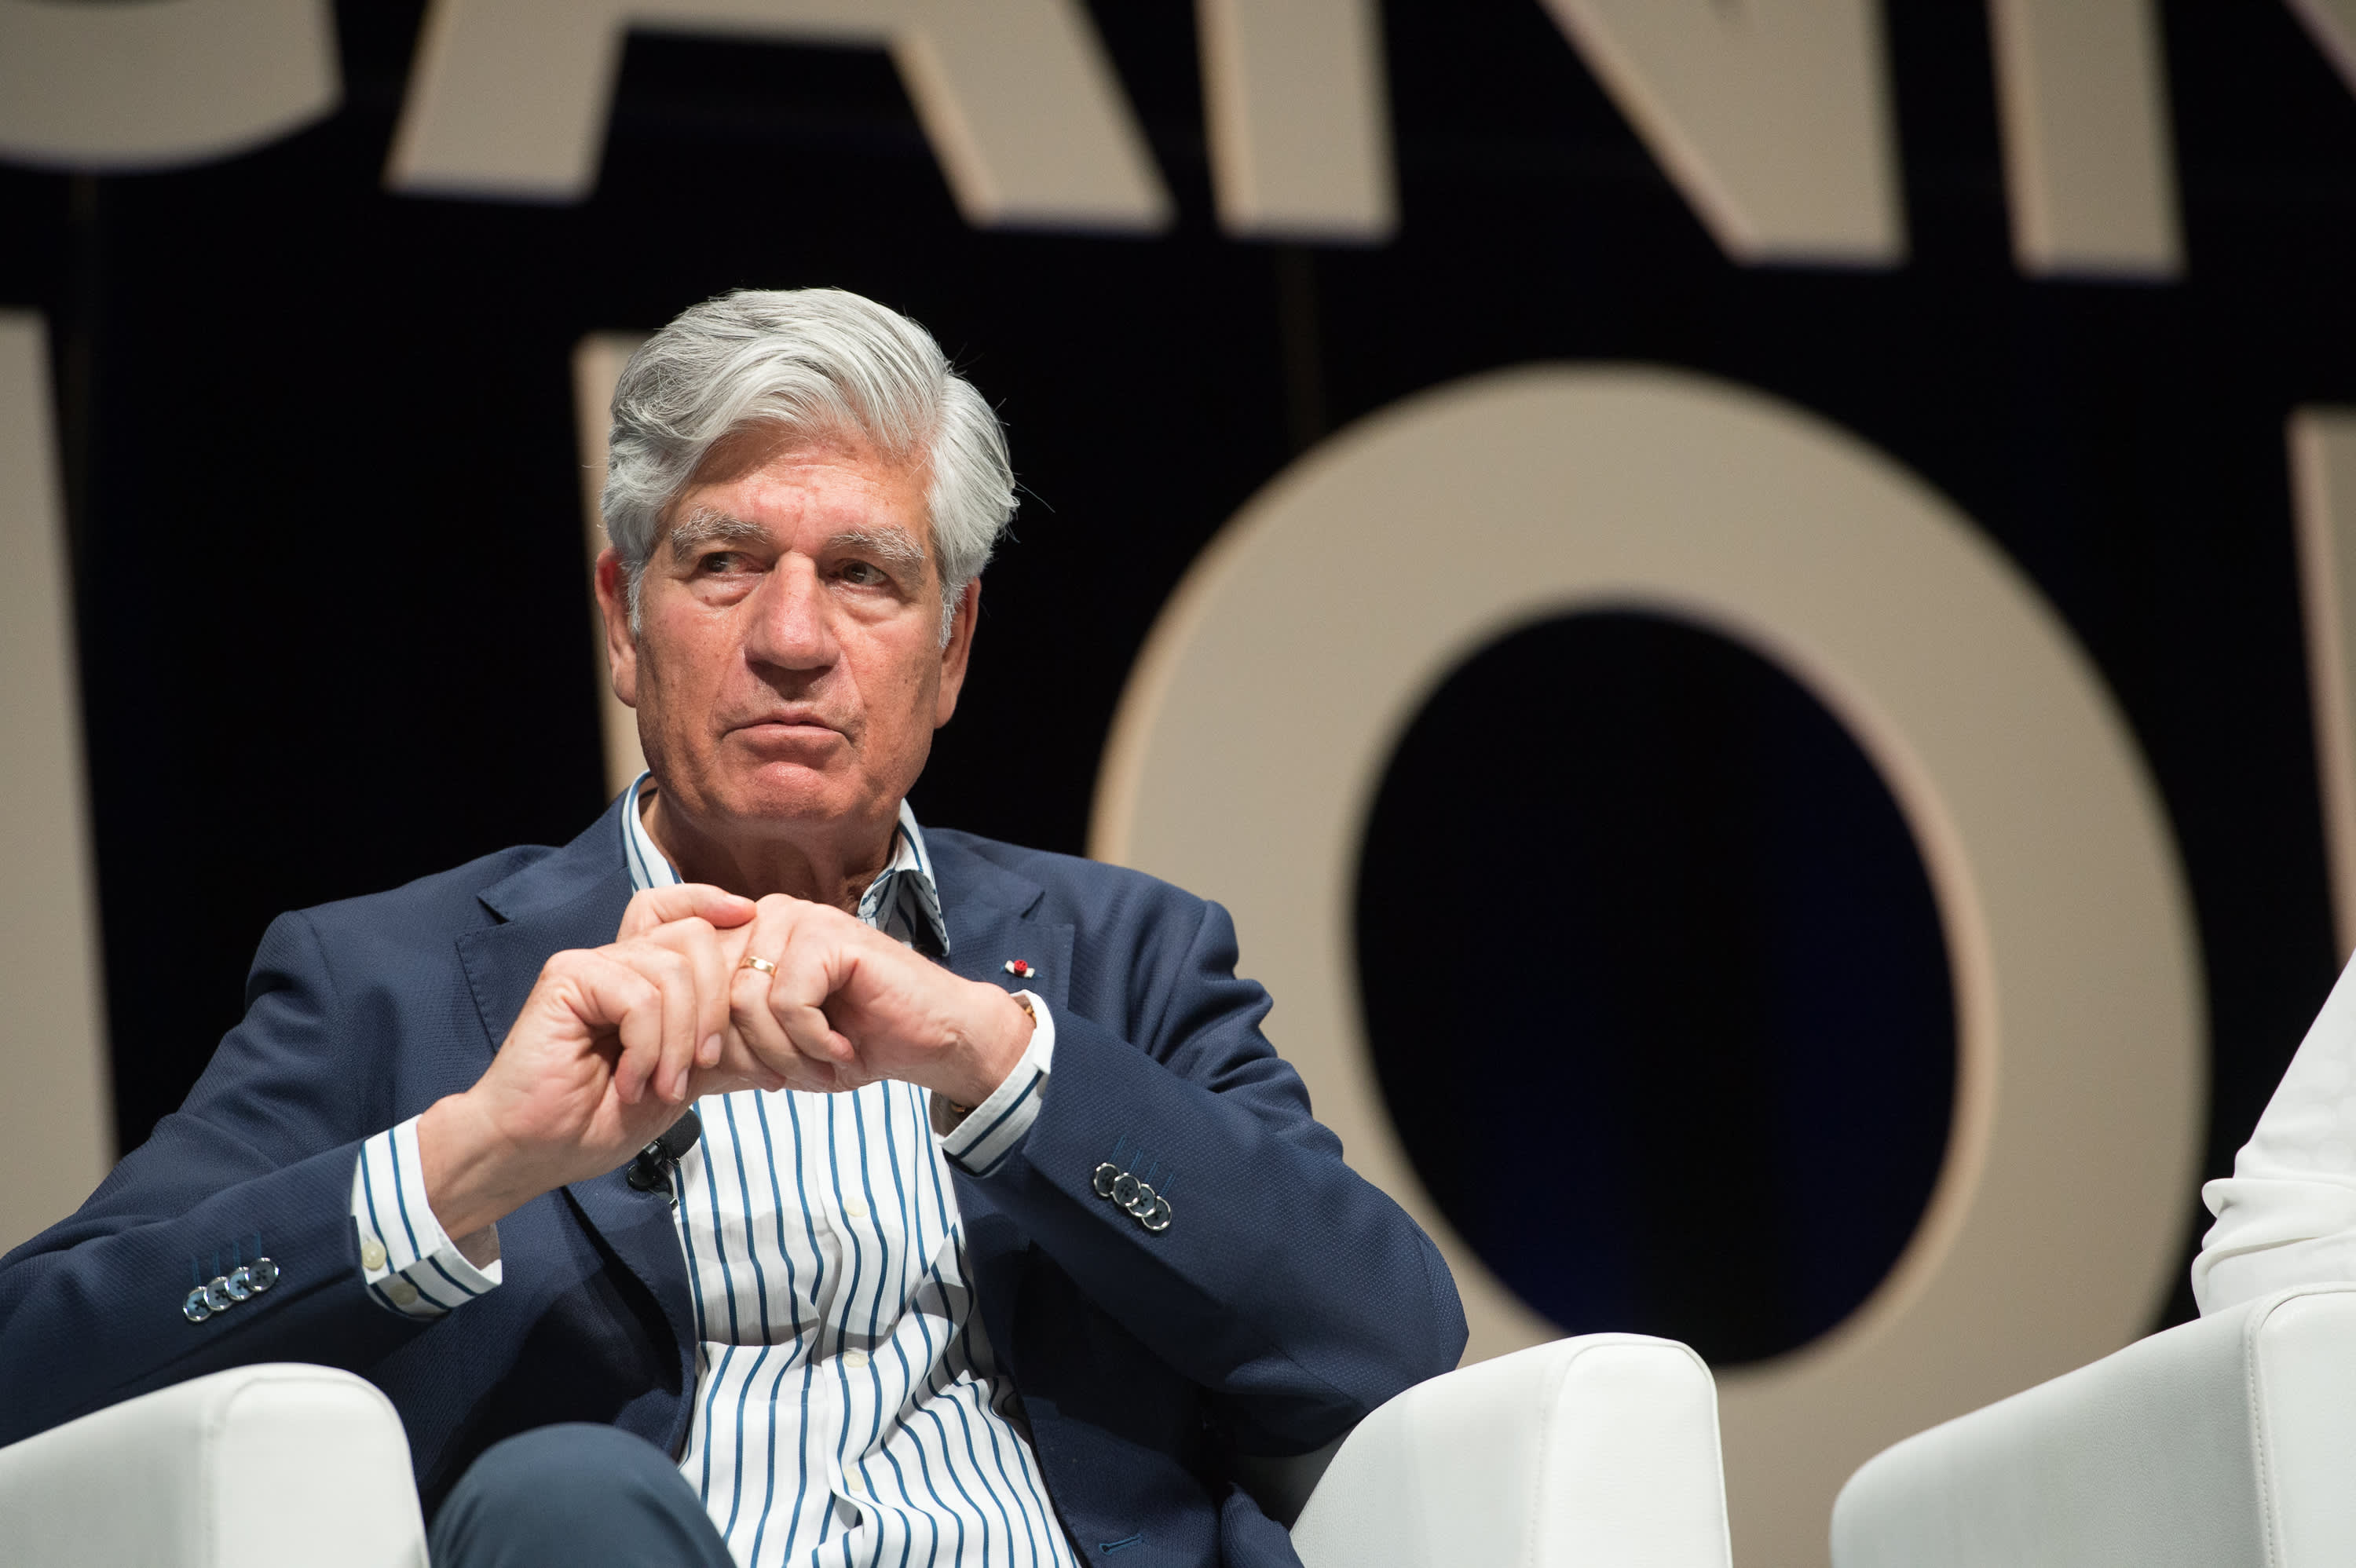 Digital privacy moves from Apple and Google are forcing the advertising industry to reconsider the way it works, Publicis Groupe's Maurice Levy t